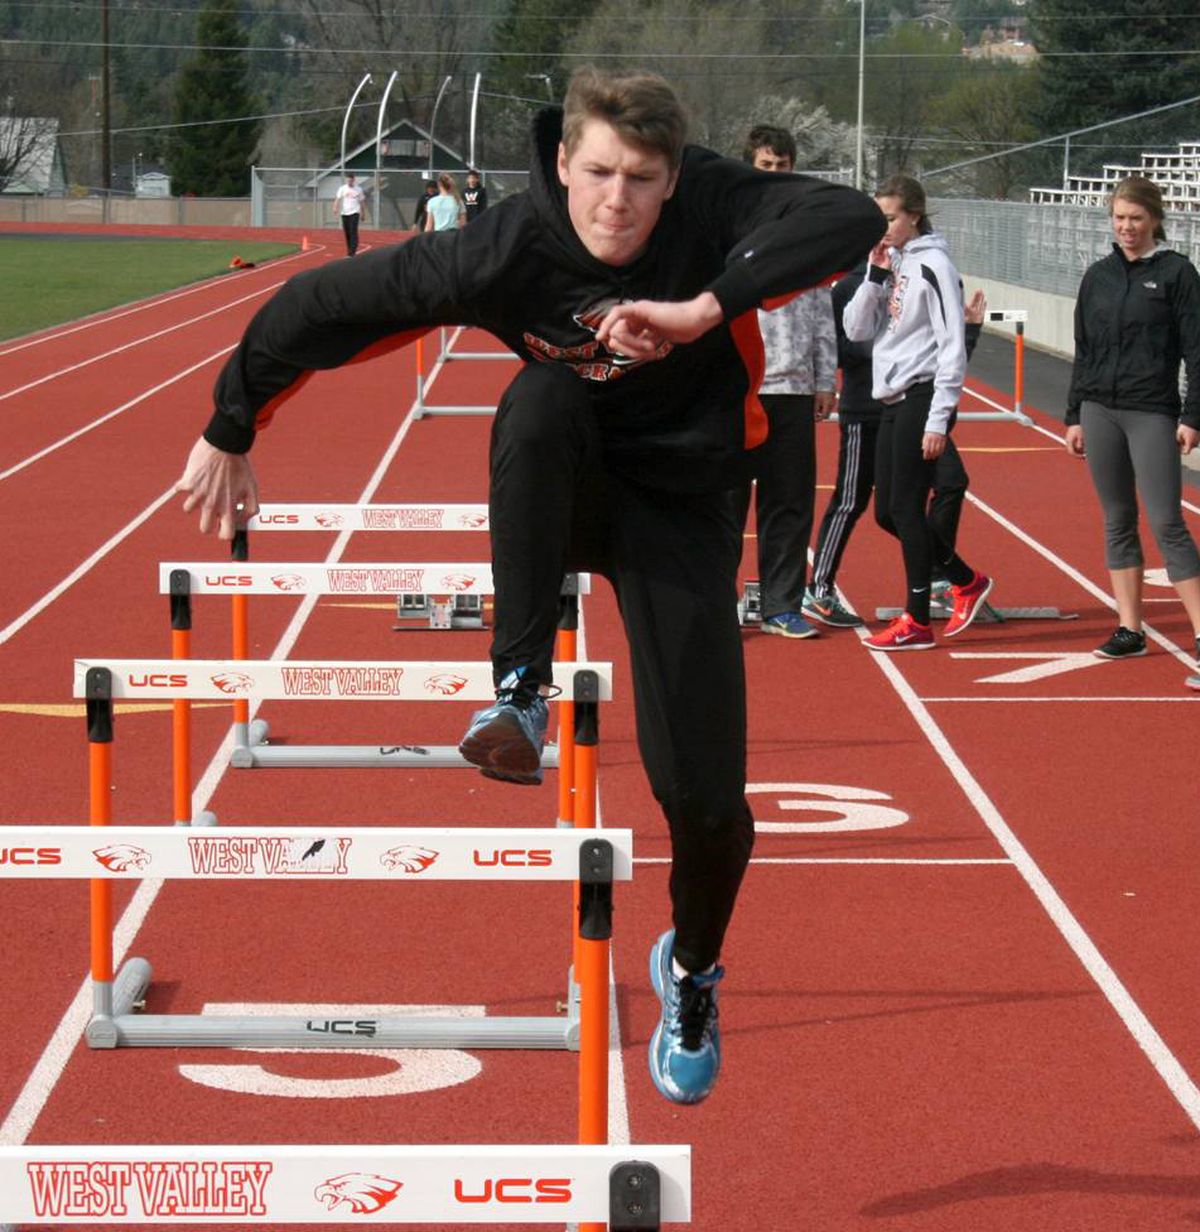 West Valley hurdler Mac Baxter works on his technique. Baxter already owns the fastest times in Class 2A in both the 110 and 300 hurdles this season.